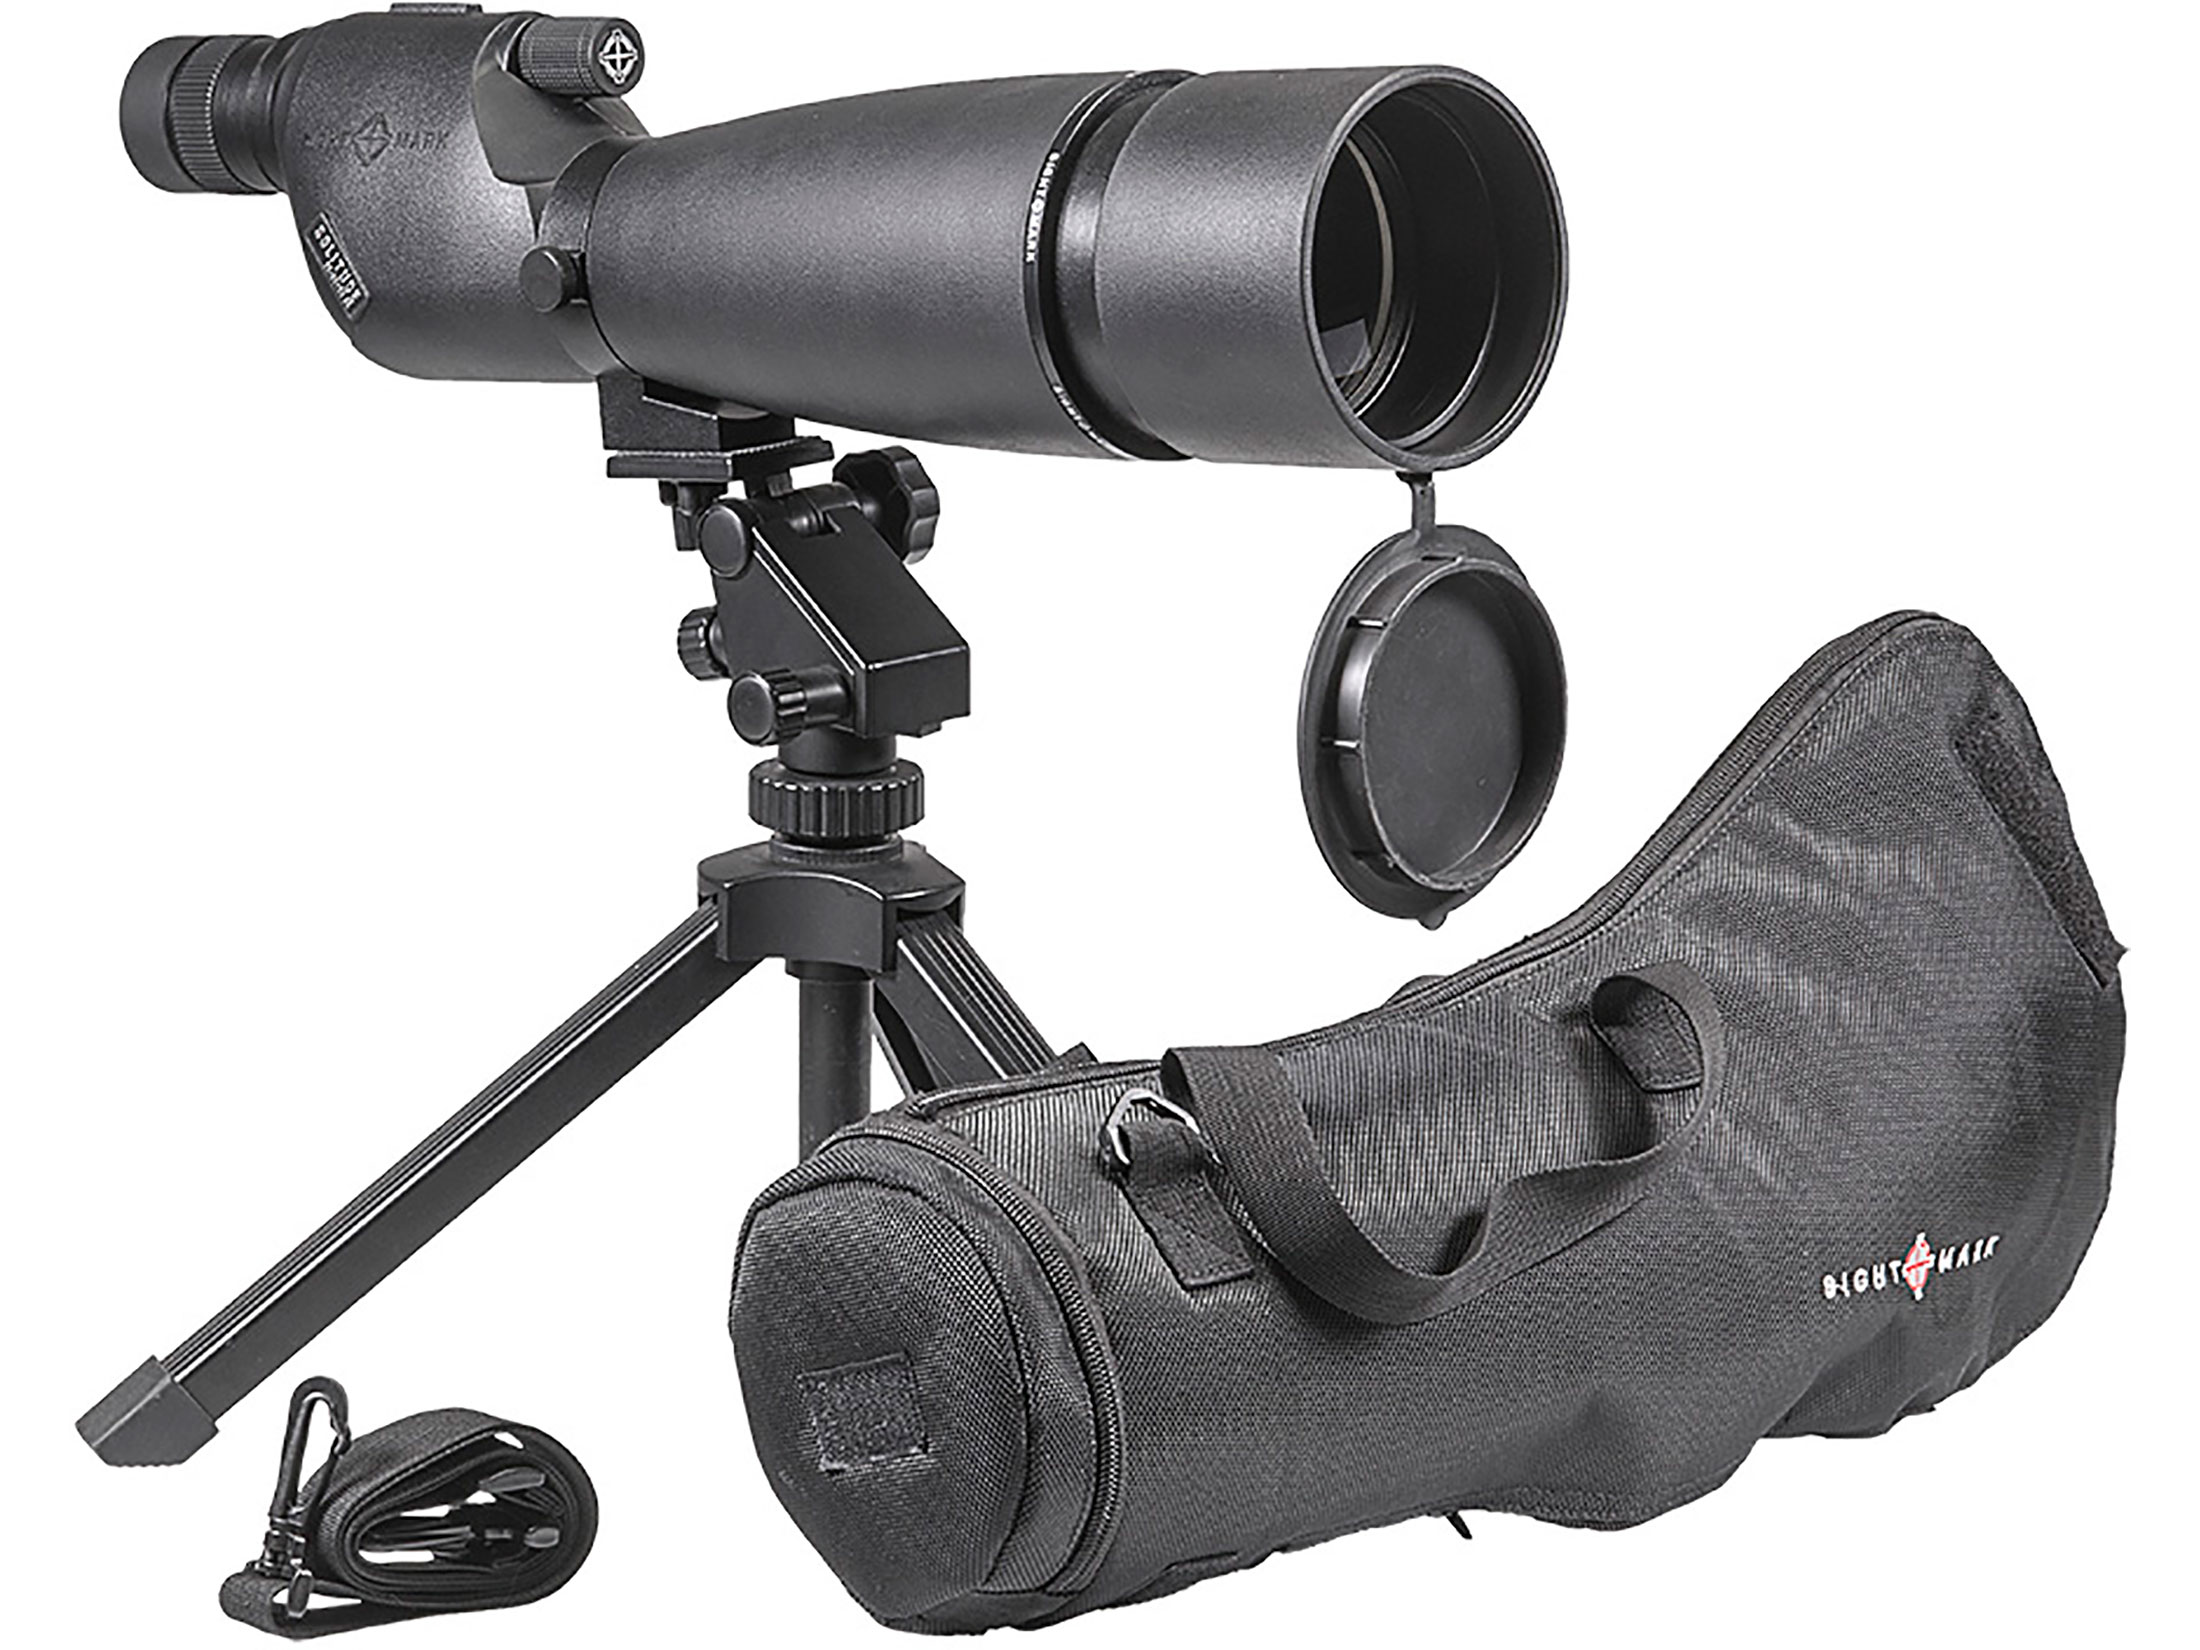 Sightmark Solitude Spotting Scope 20-60x 80mm Matte with Case, Lens Covers and Tripod For Sale